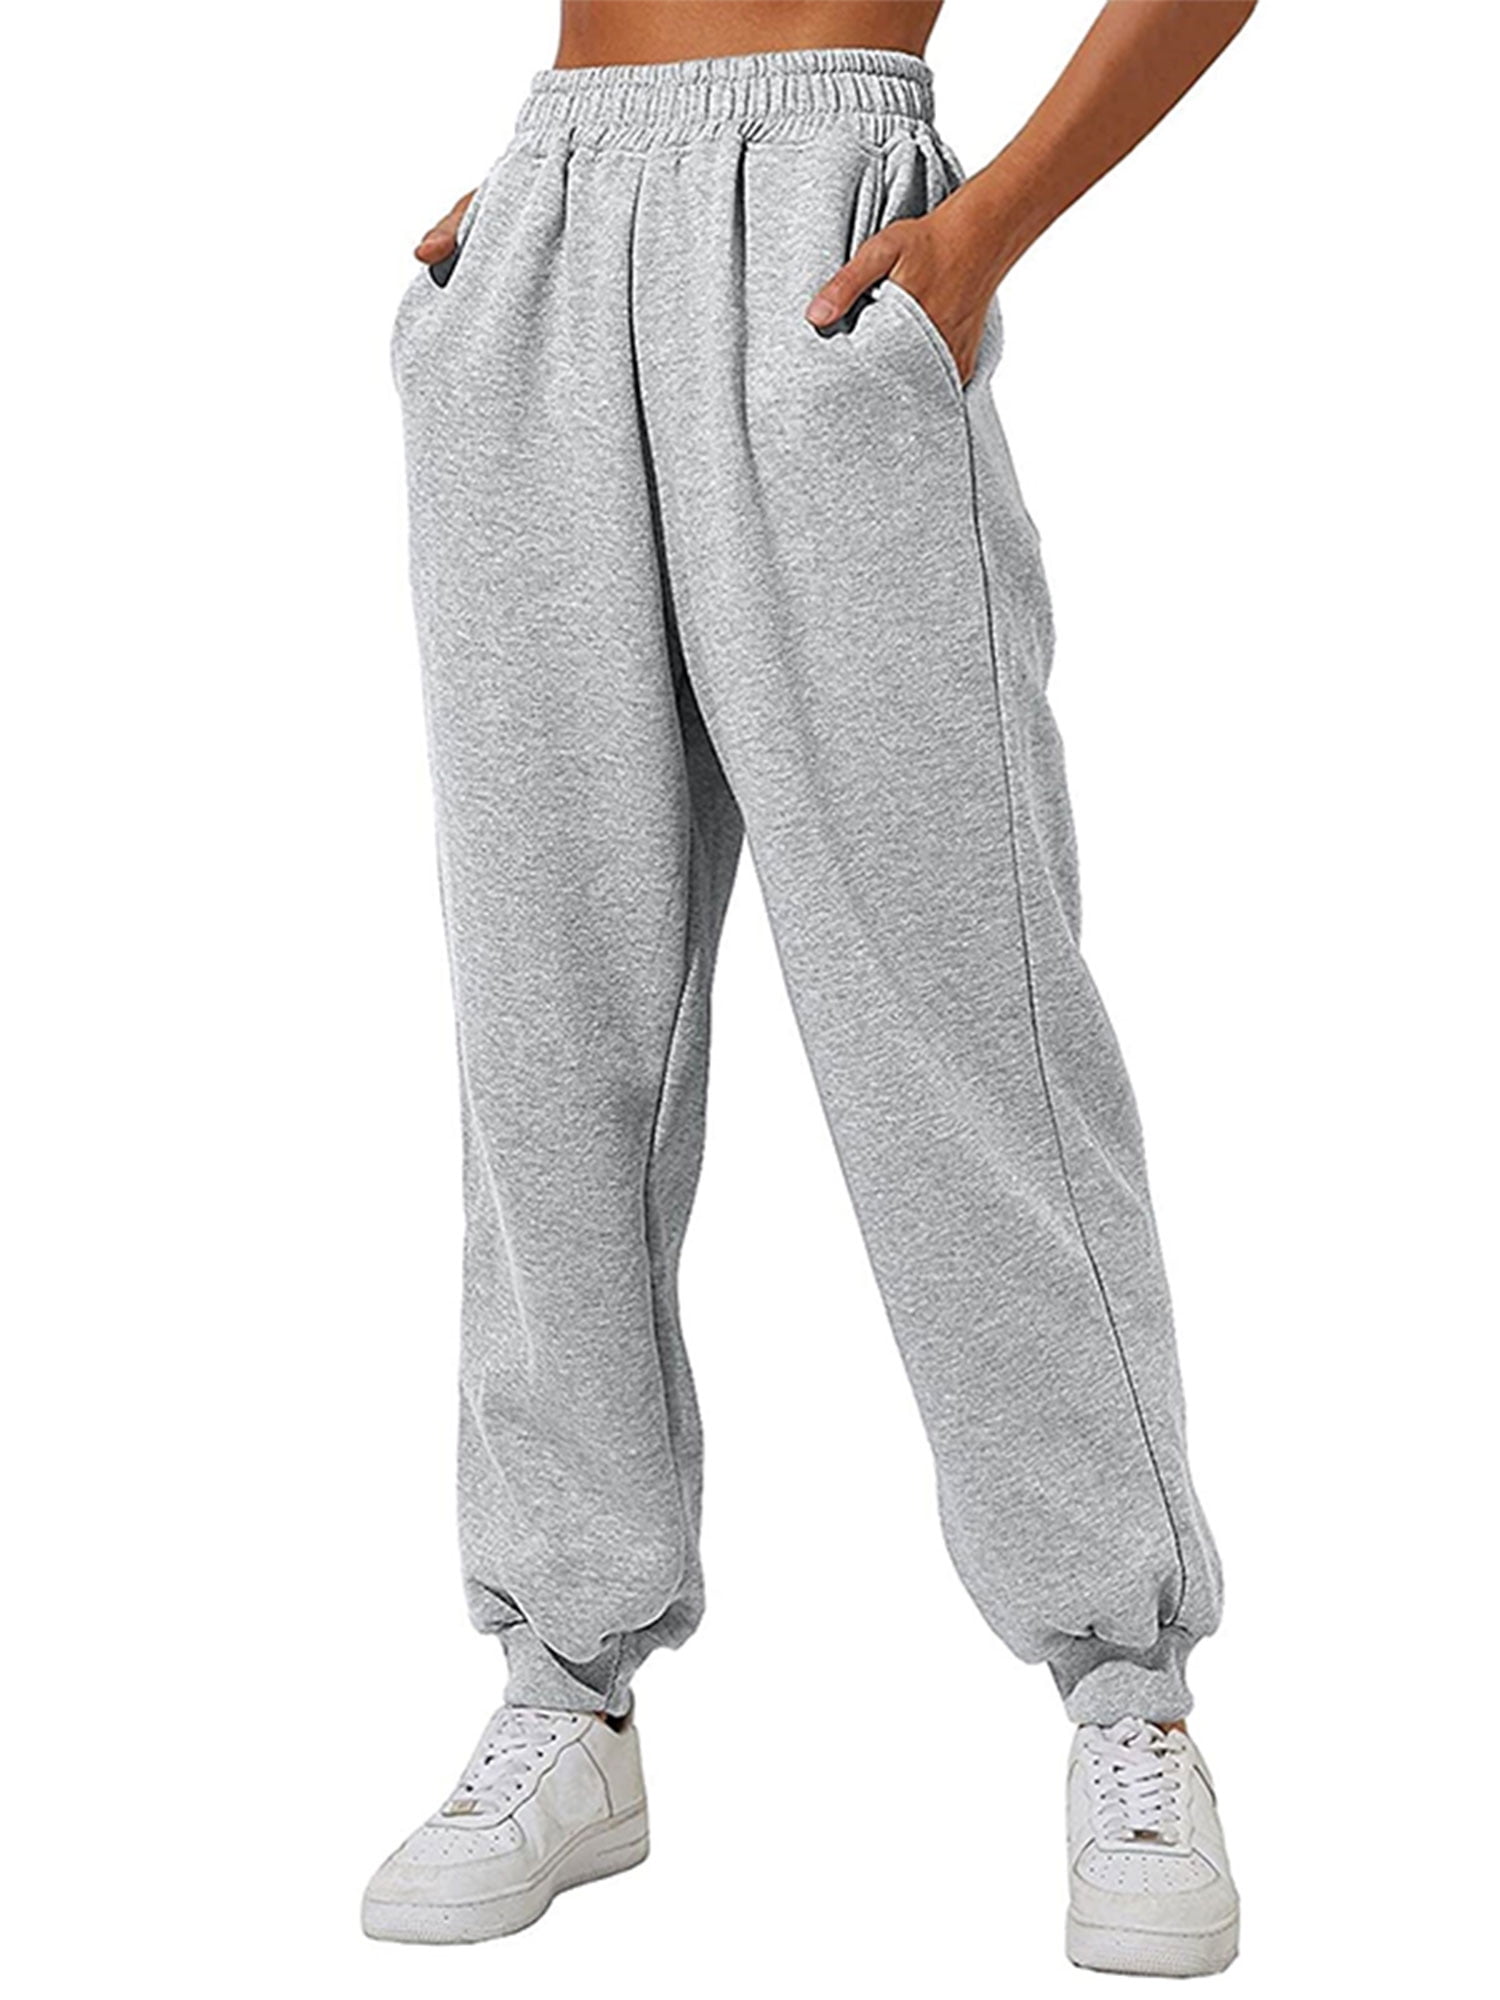 Women's Fleece Lined Sweatpants Slim-Fit Warm Comfy Sports Pants with  Pockets Athletic Running Workout Pants